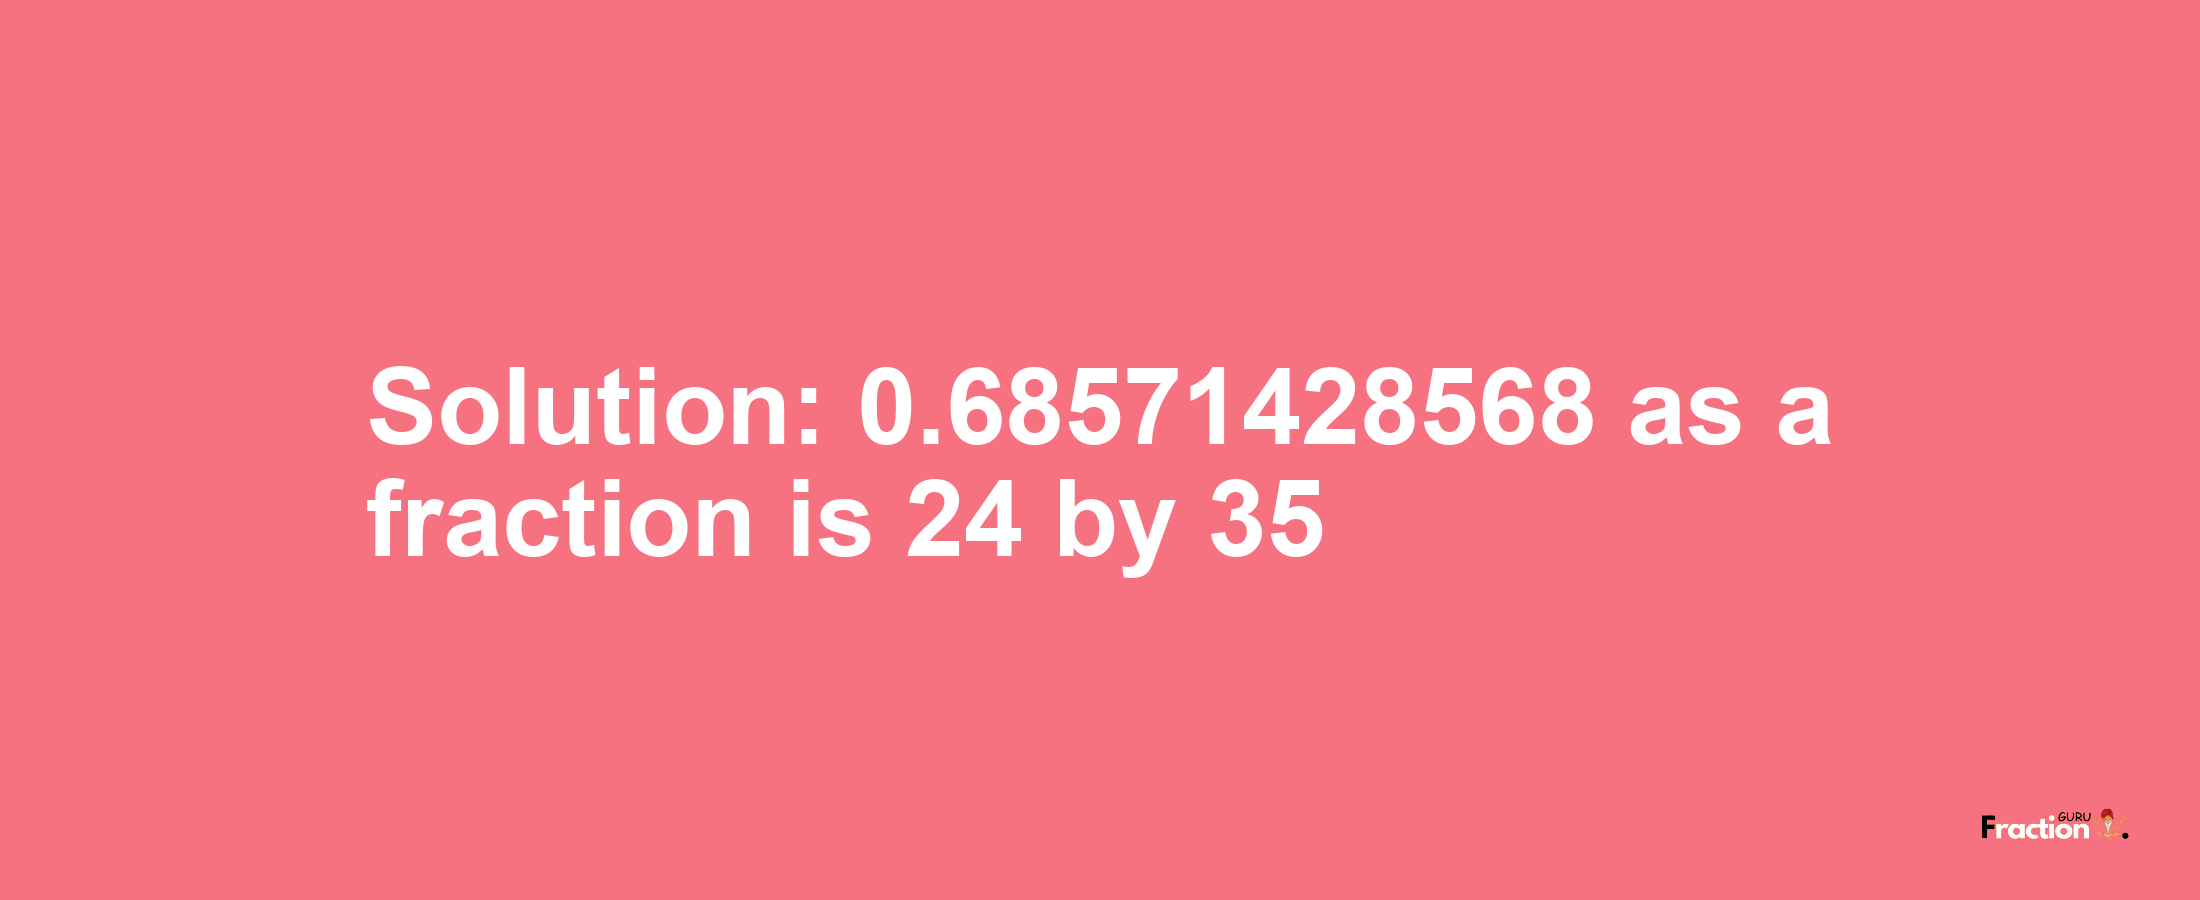 Solution:0.68571428568 as a fraction is 24/35